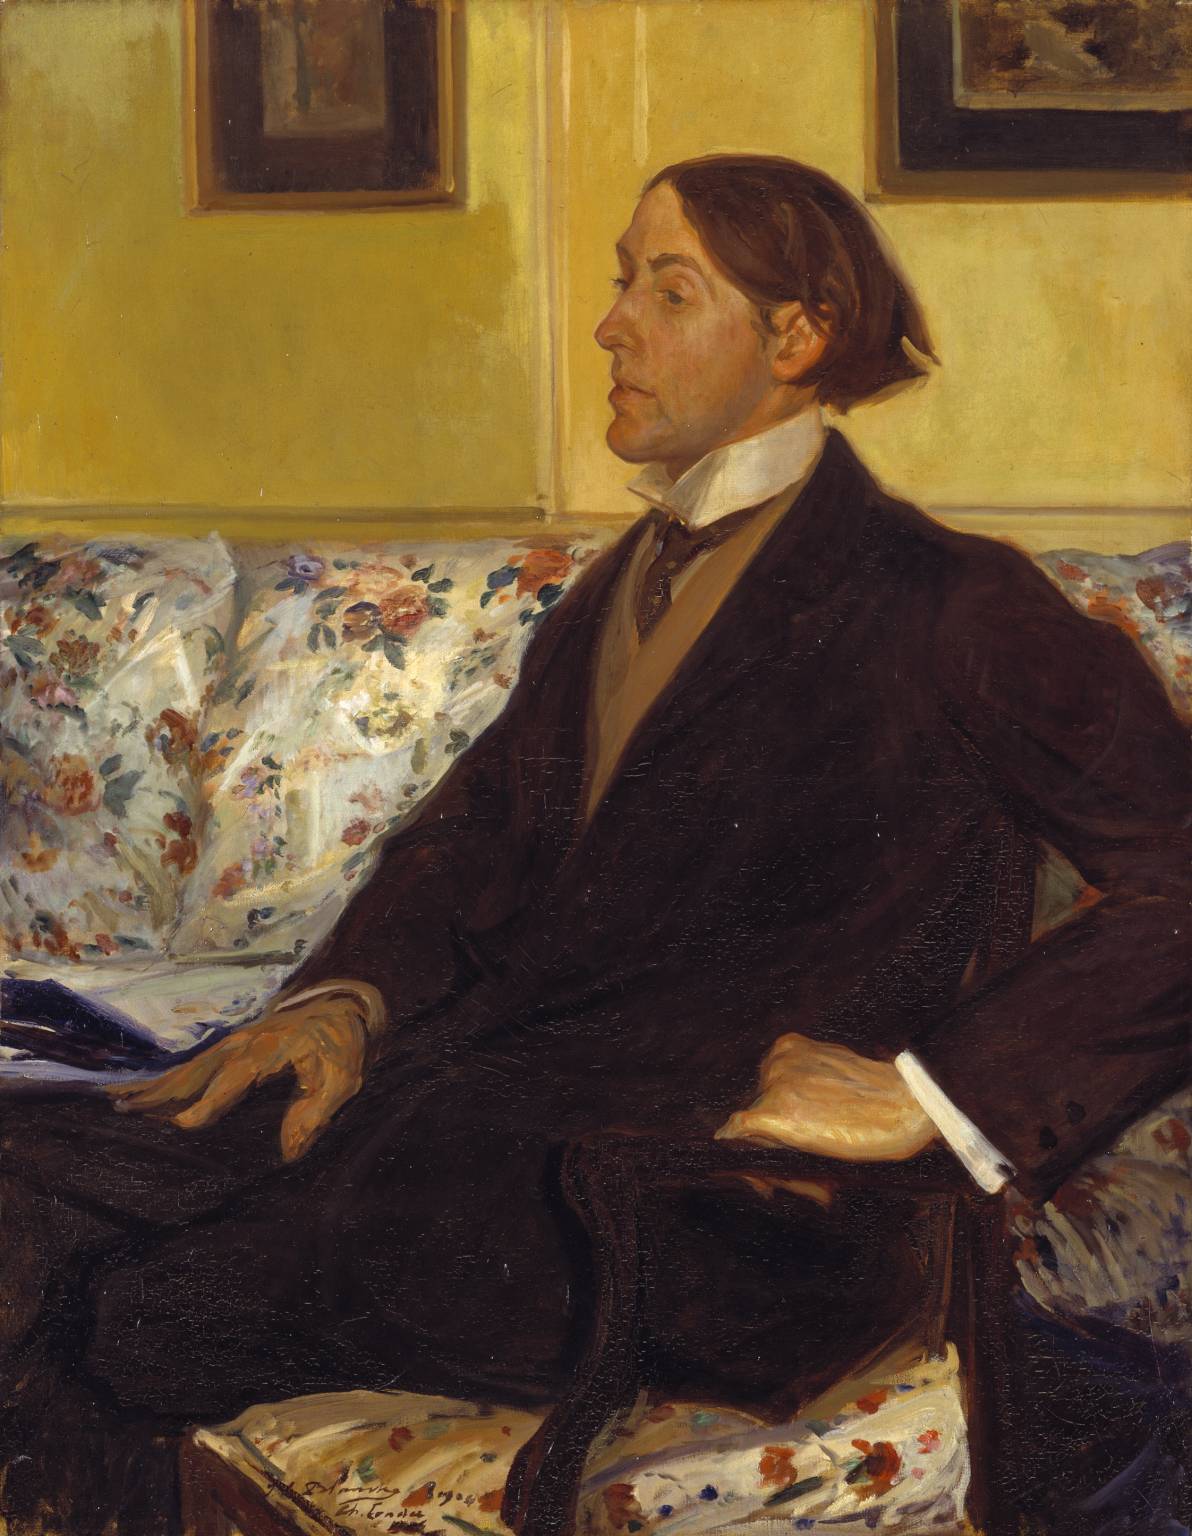 Charles Conder by Jacques-Emile Blanche, 1904